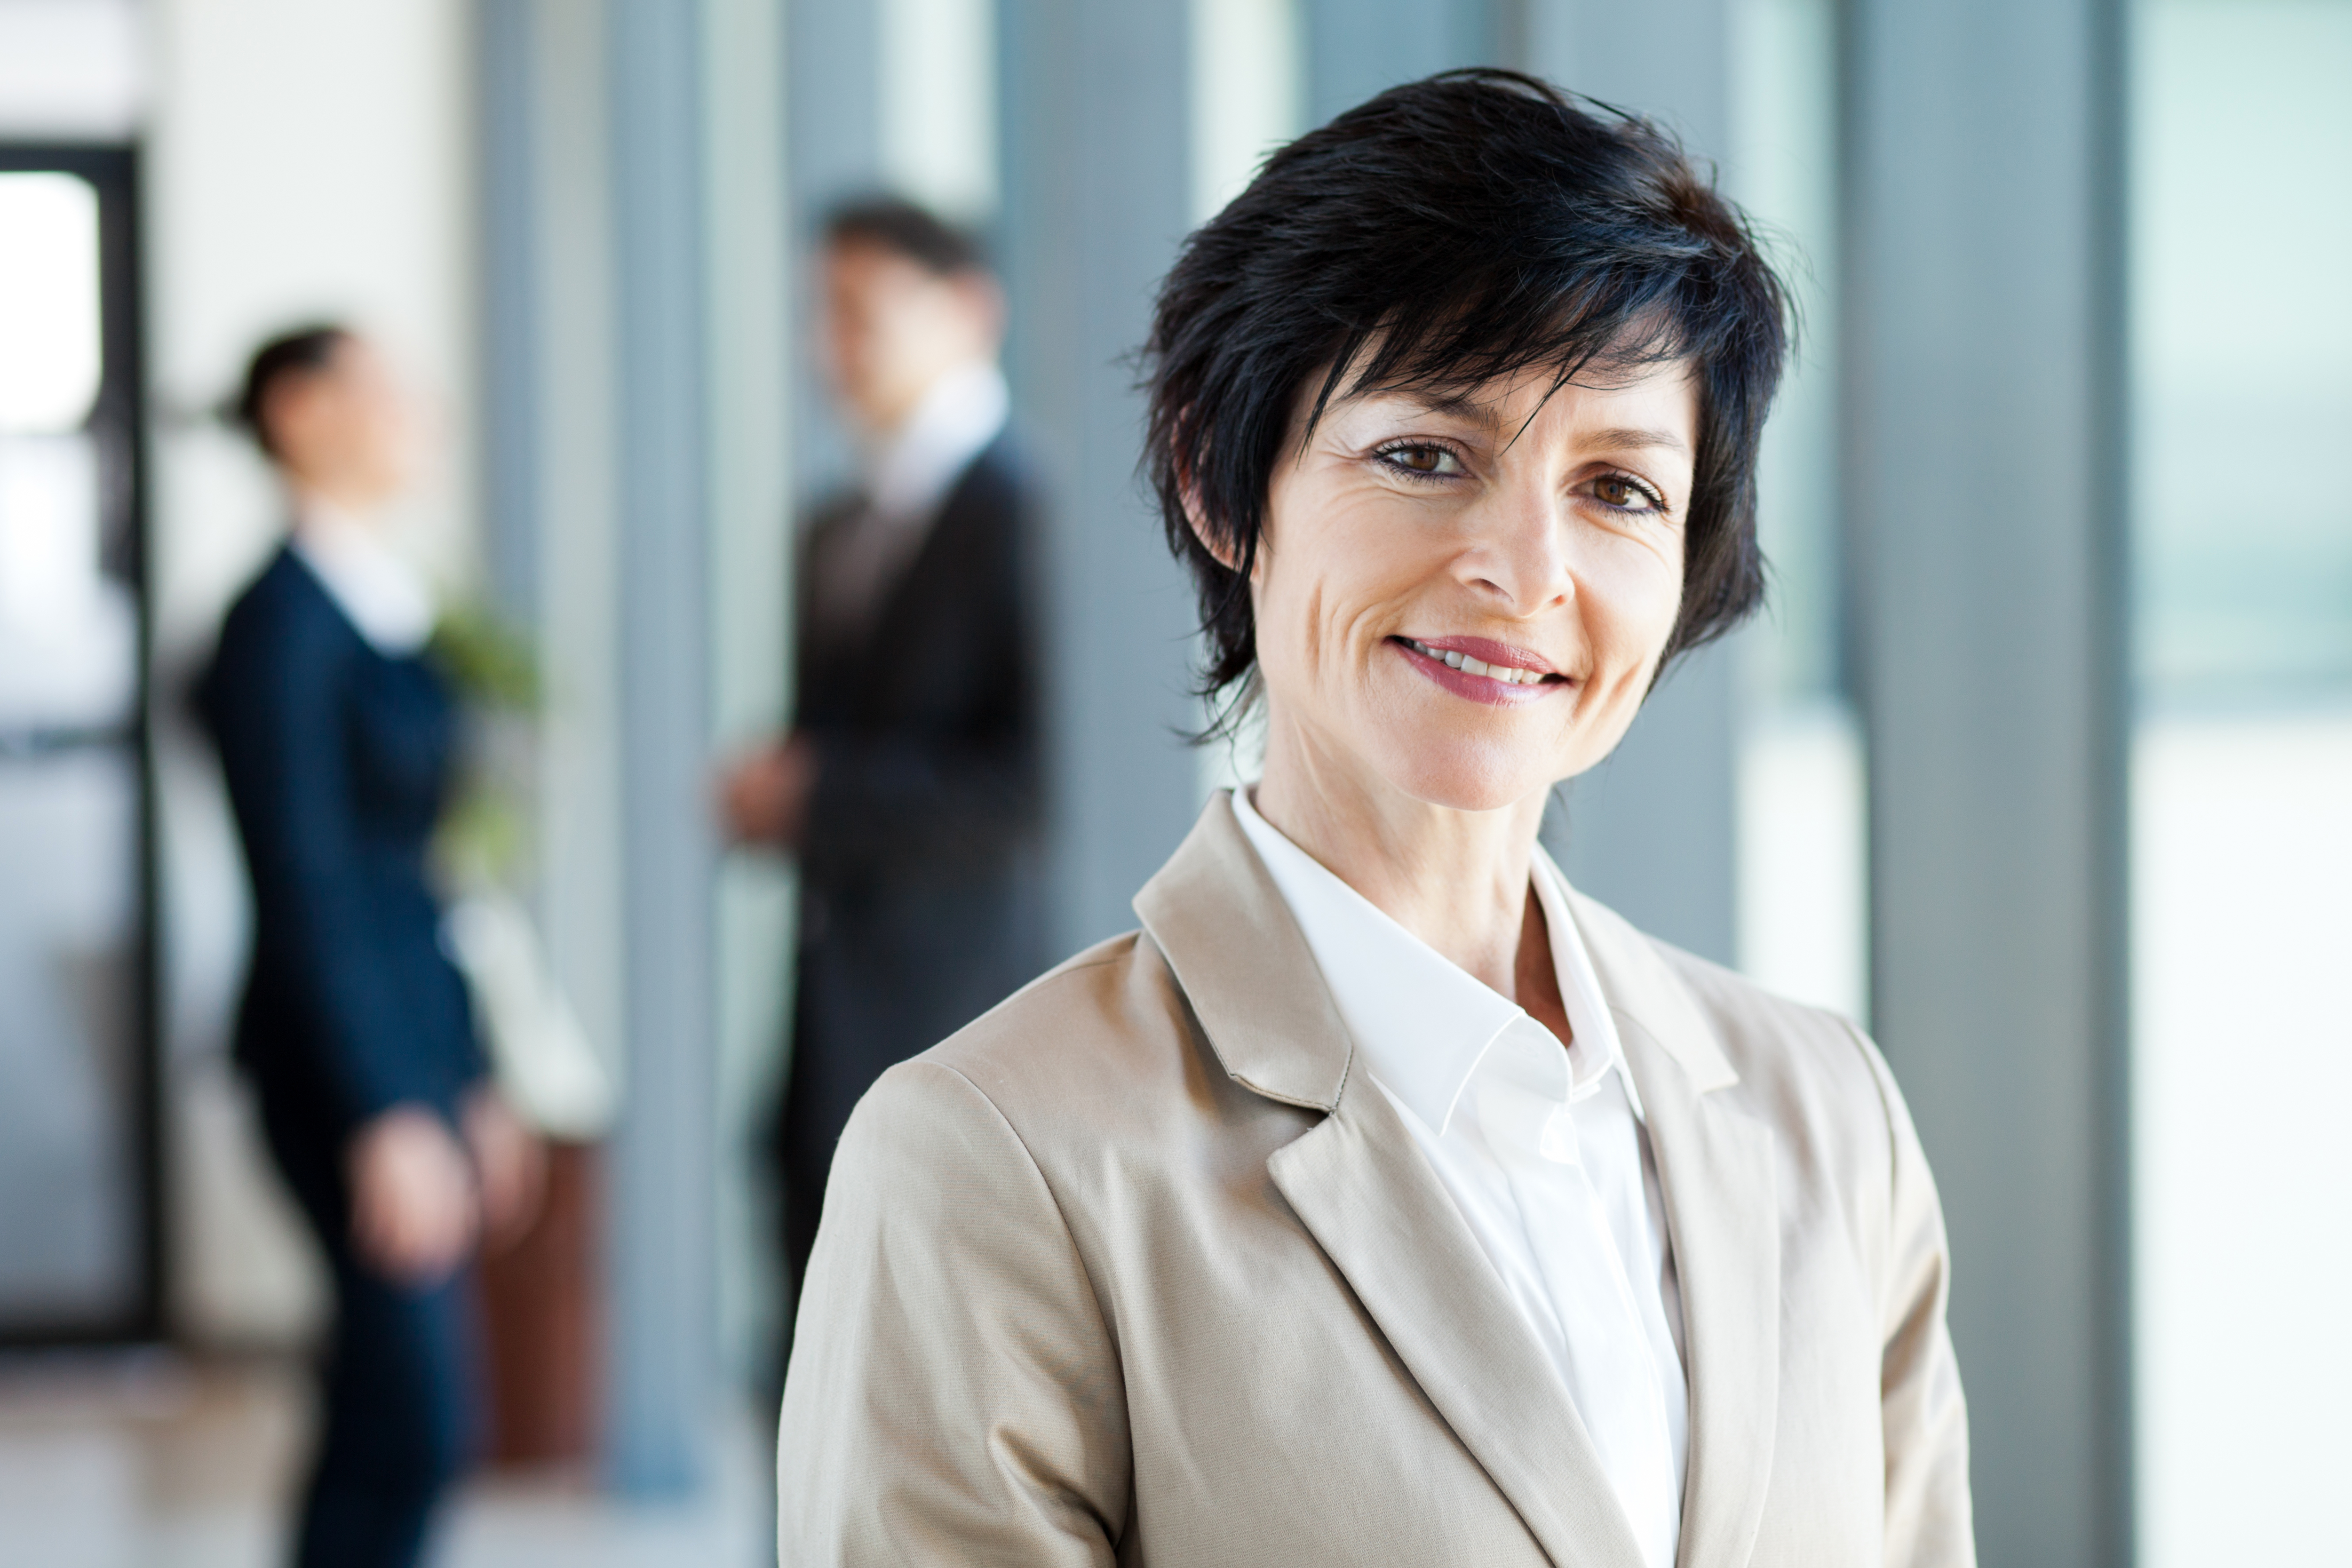 middle aged professional woman with black short hair smiles